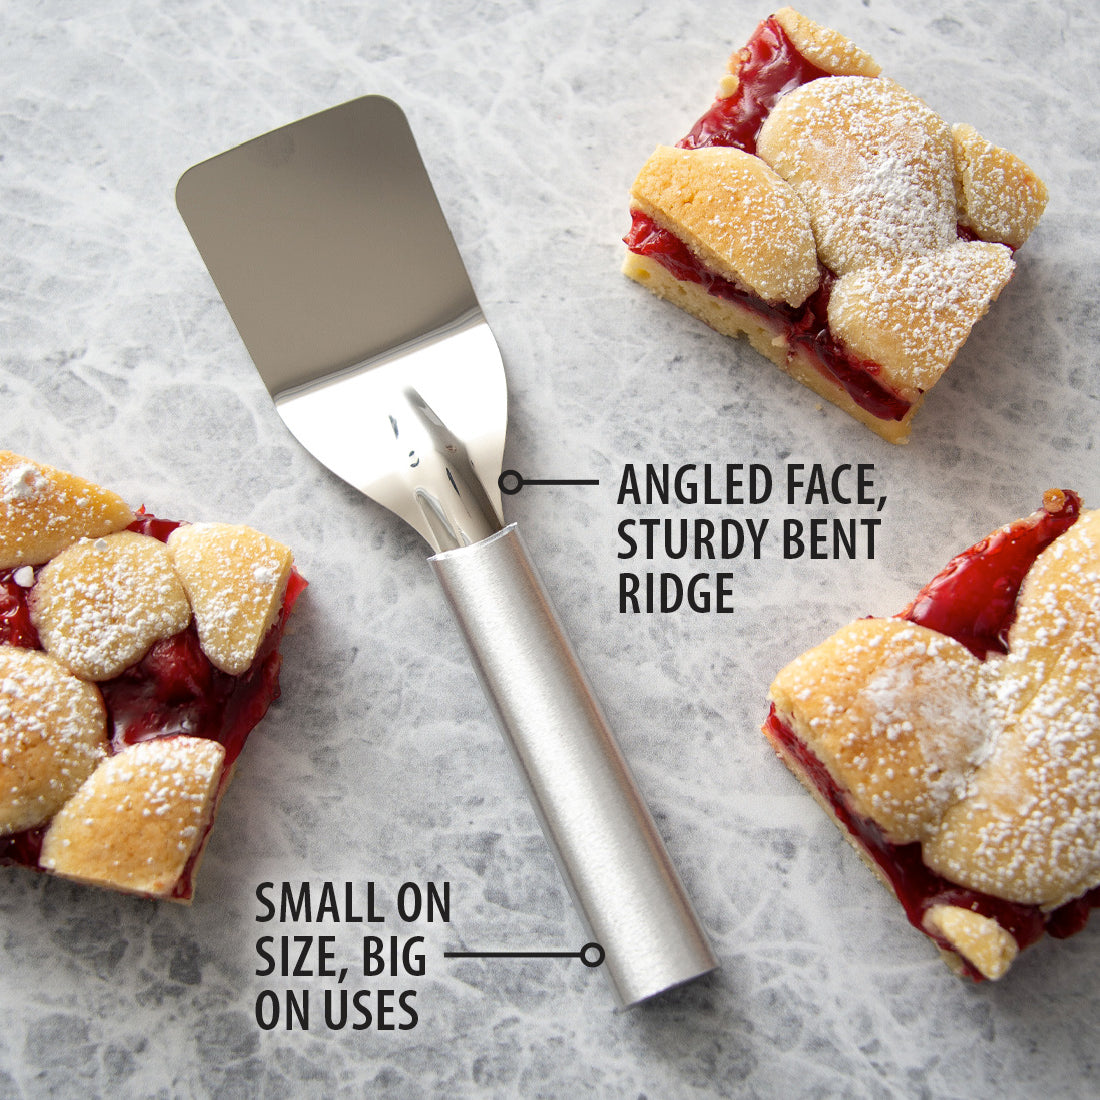 Real Miniature Cooking: Tiny Spatula and Strainer Can Used for